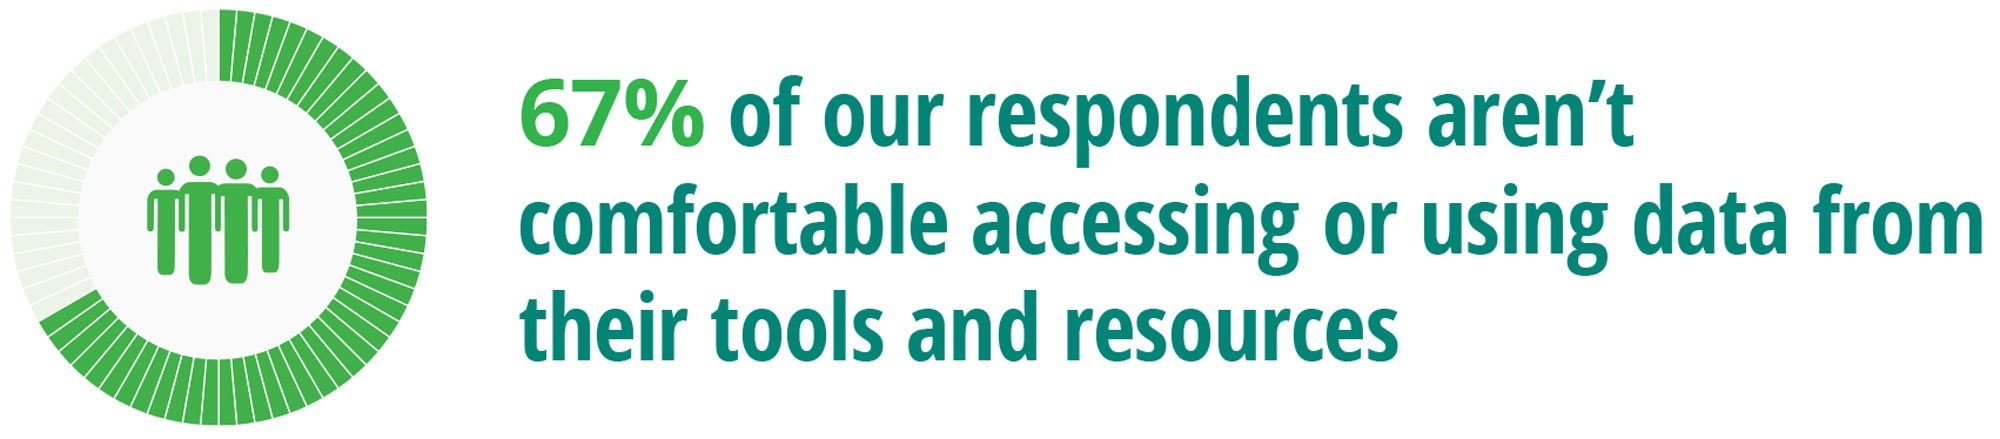 67% of our respondents aren’t comfortable accessing or using data from their tools and resources